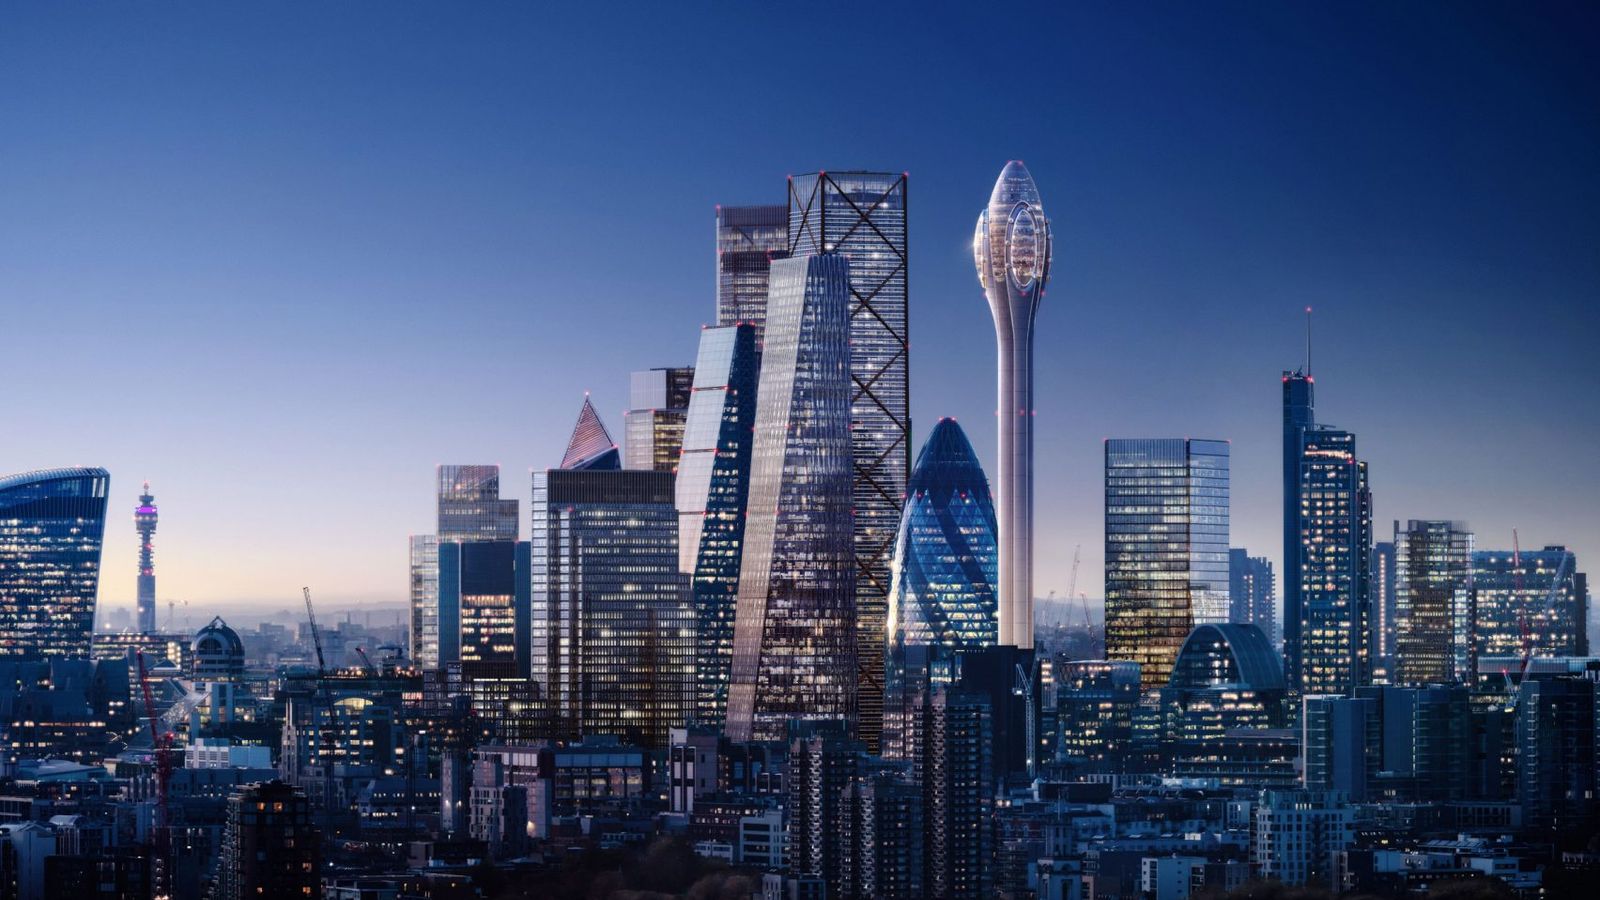 The Tulip Plans unveiled for 1,000ft skyscraper in London with glass